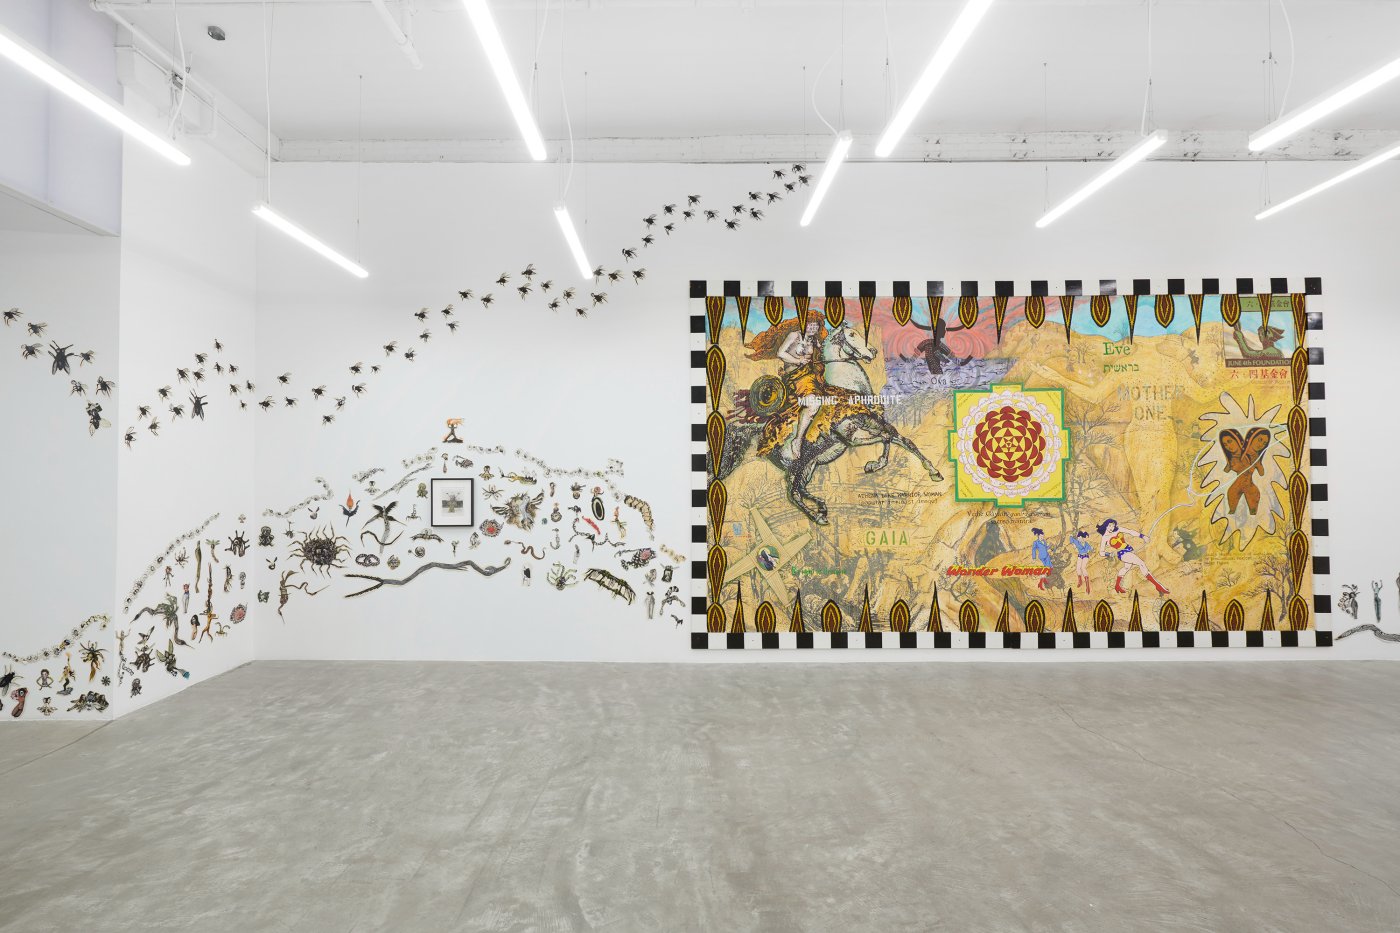 Installation image for Mary Beth Edelson: A Celebration, at David Lewis